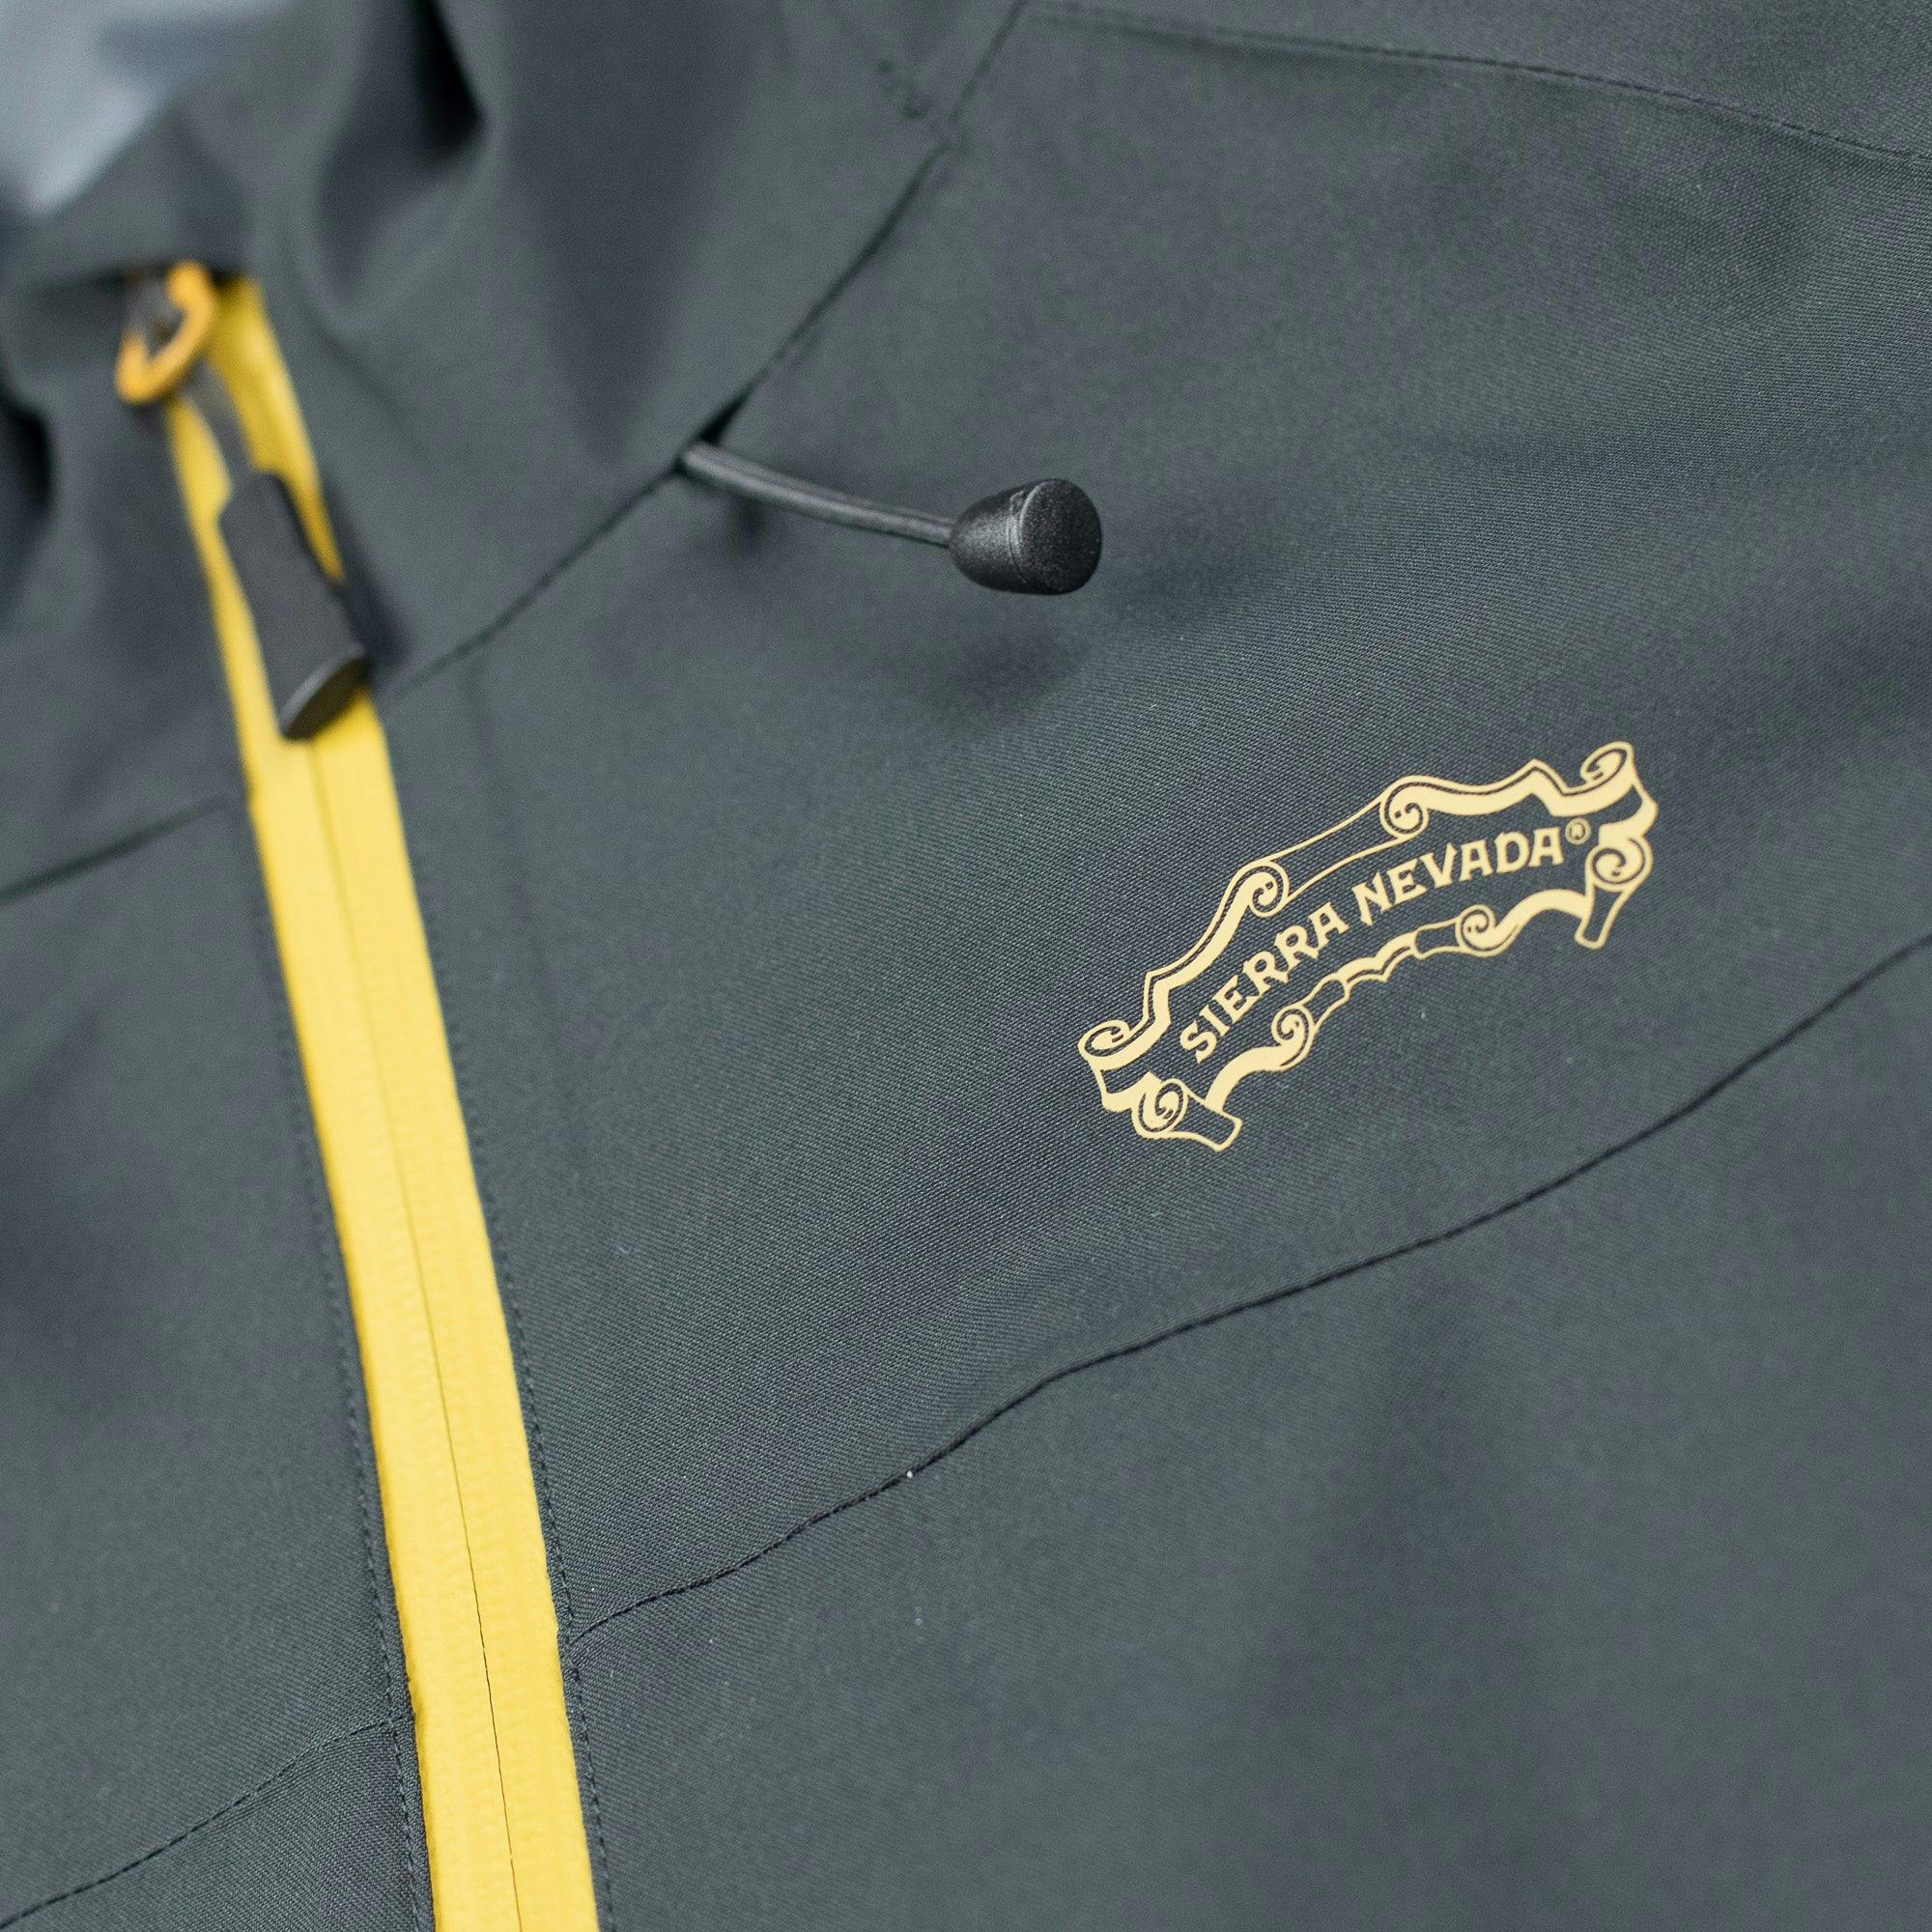 Detail view of the Sierra Nevada Brewing Co. scroll logo on the Men's Rain Jacket